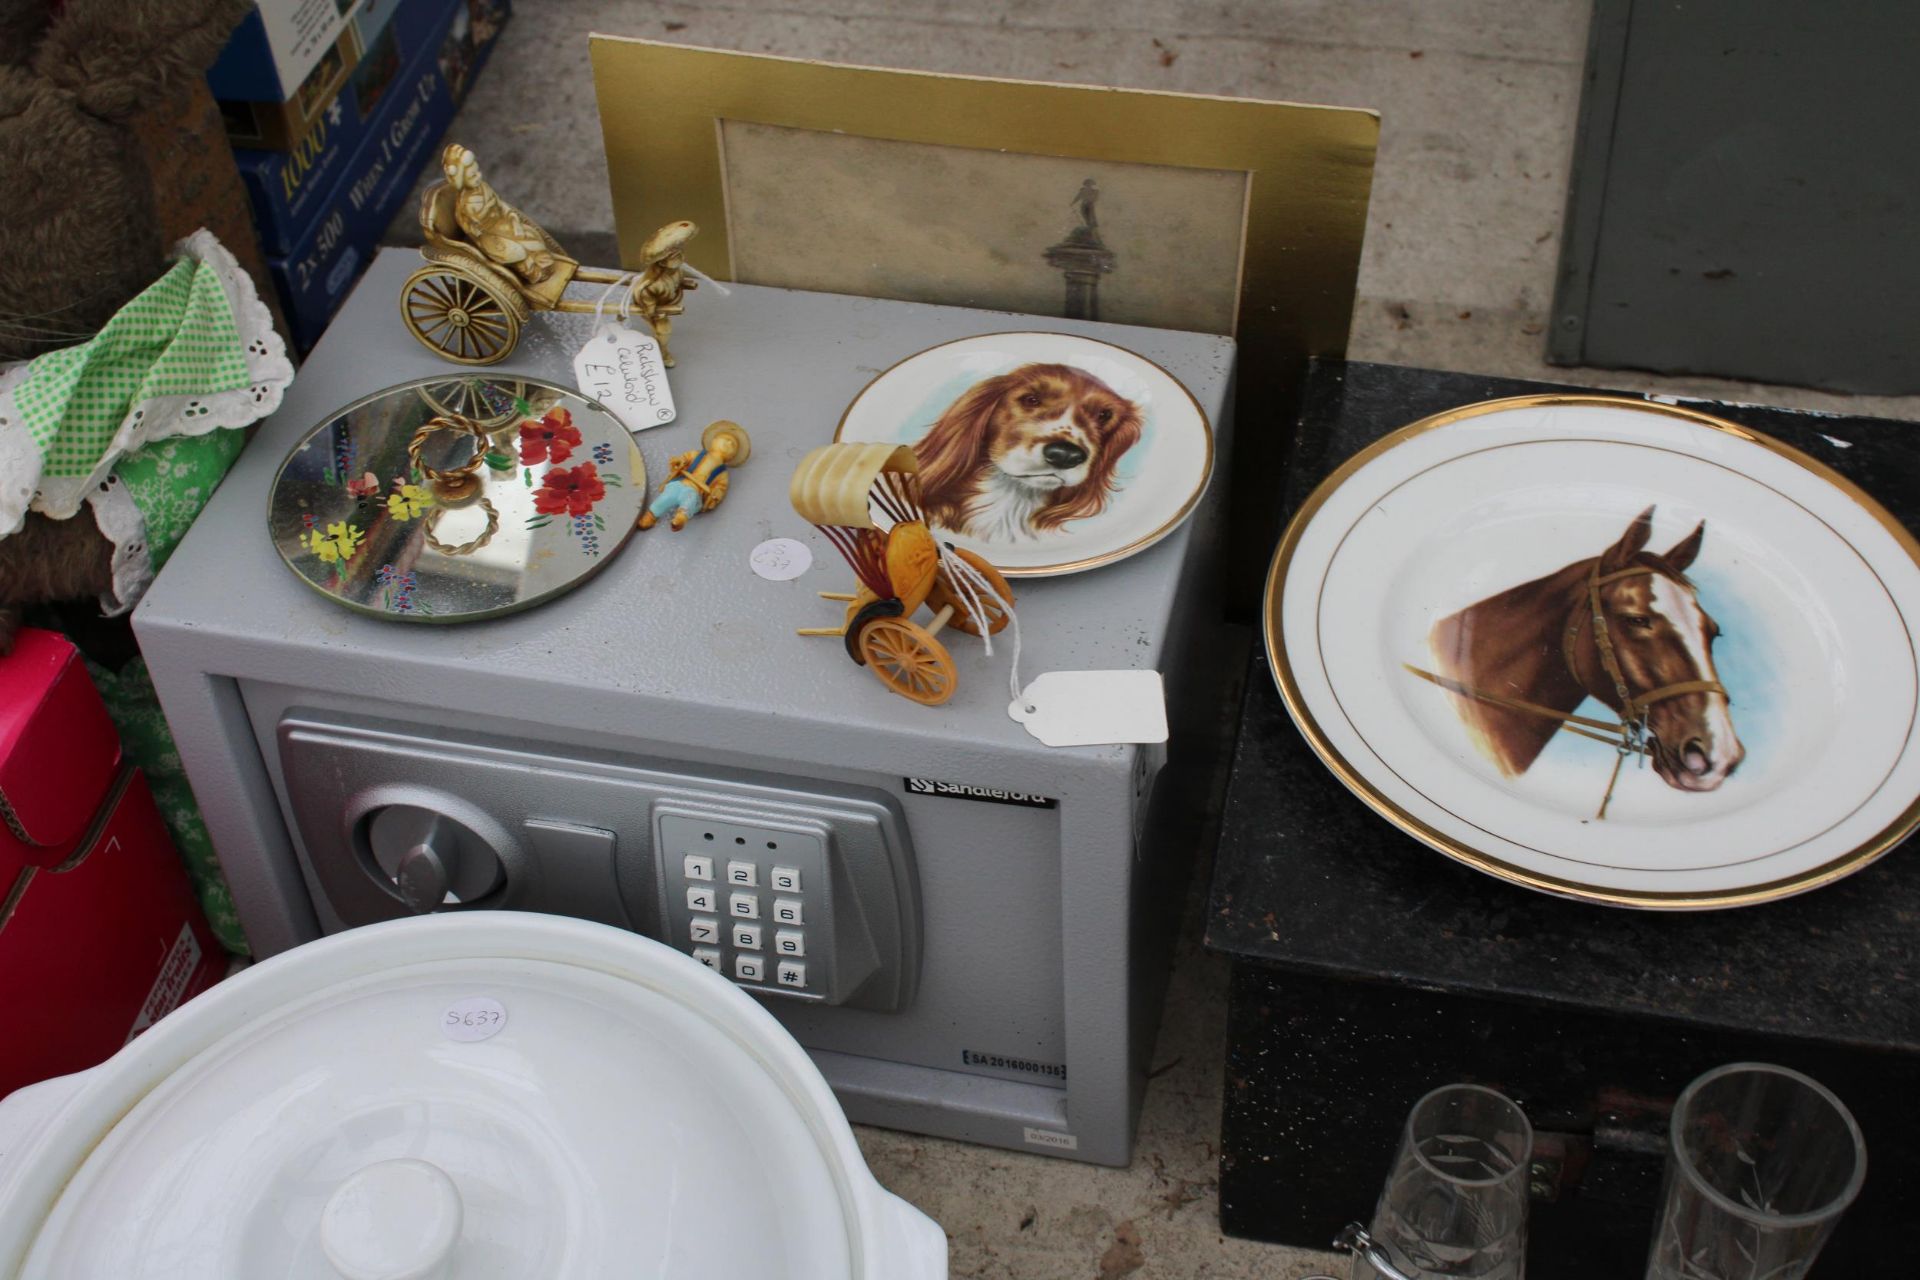 AN ASSORTMENT OF ITEMS TO INCLUDE A DIGITAL SAFE, MUSICAL INSTRUMENTS AND A COOKING POT ETC - Image 4 of 4